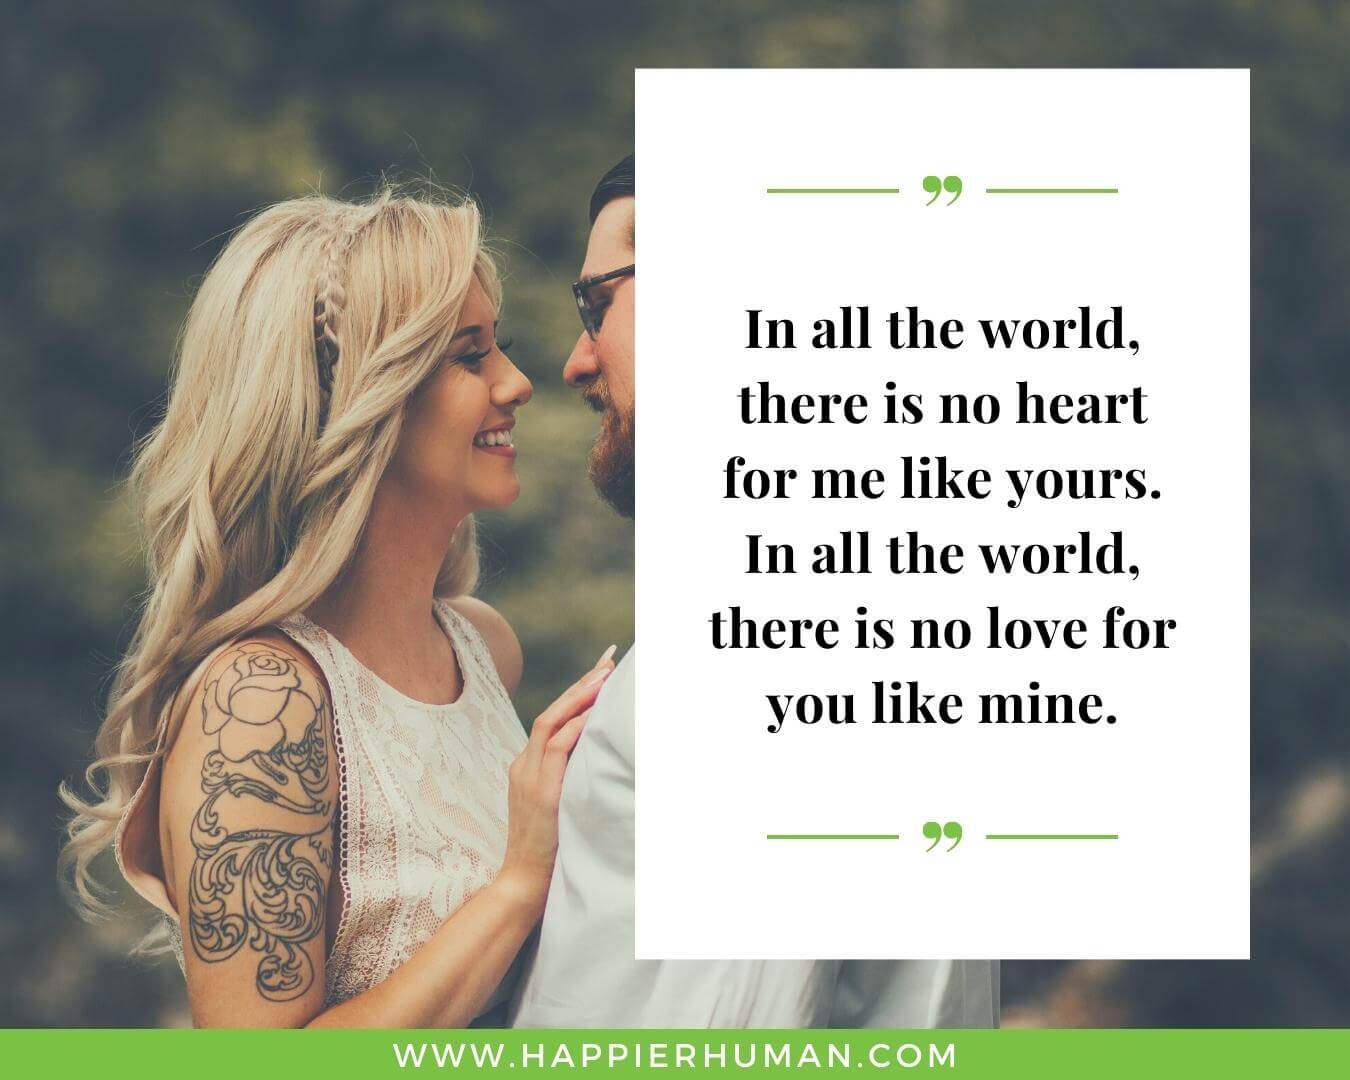 Strong relationship quotes for women - “In all the world, there is no heart for me like yours. In all the world, there is no love for you like mine.”